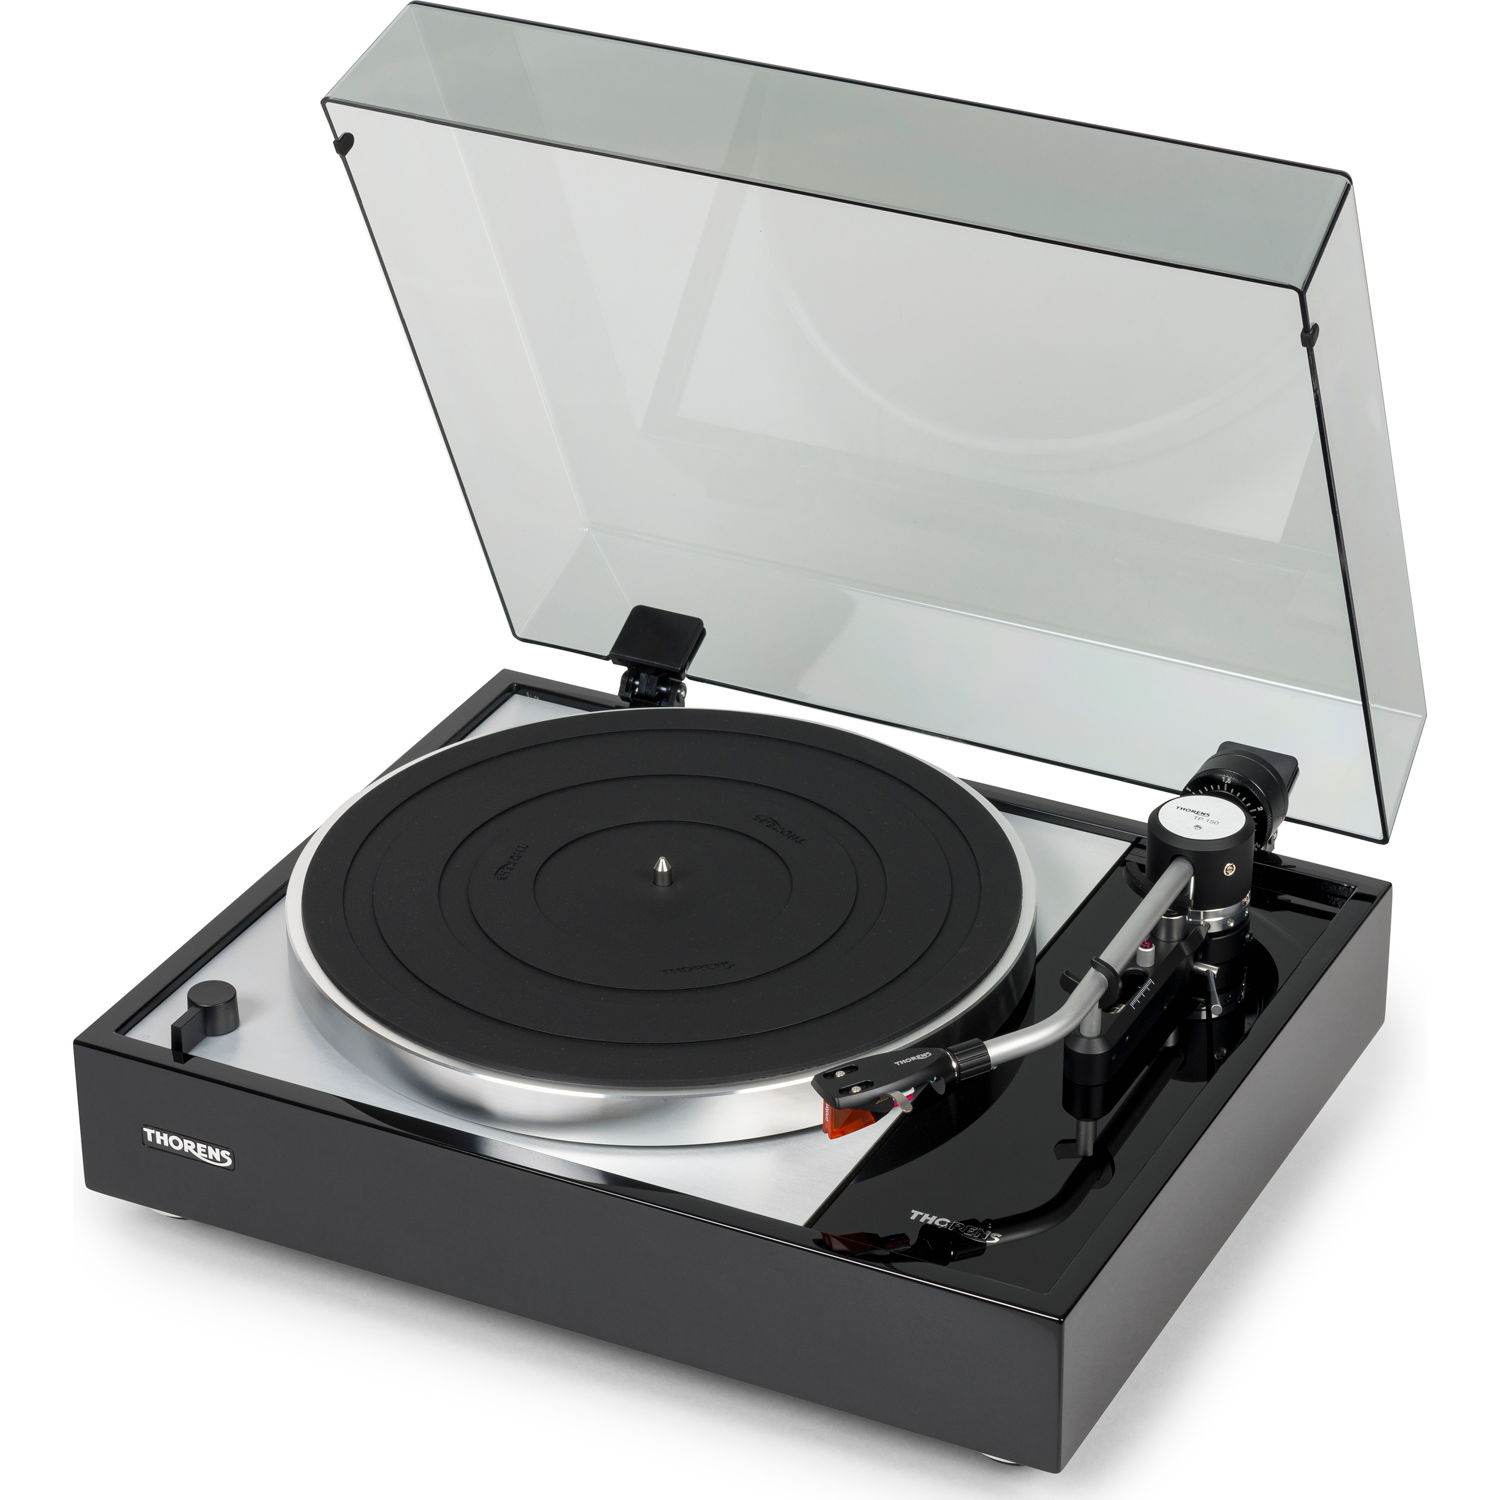 THORENS TD 1500 Sub-Chassis Turntable with 2M Bronze Cartridge 